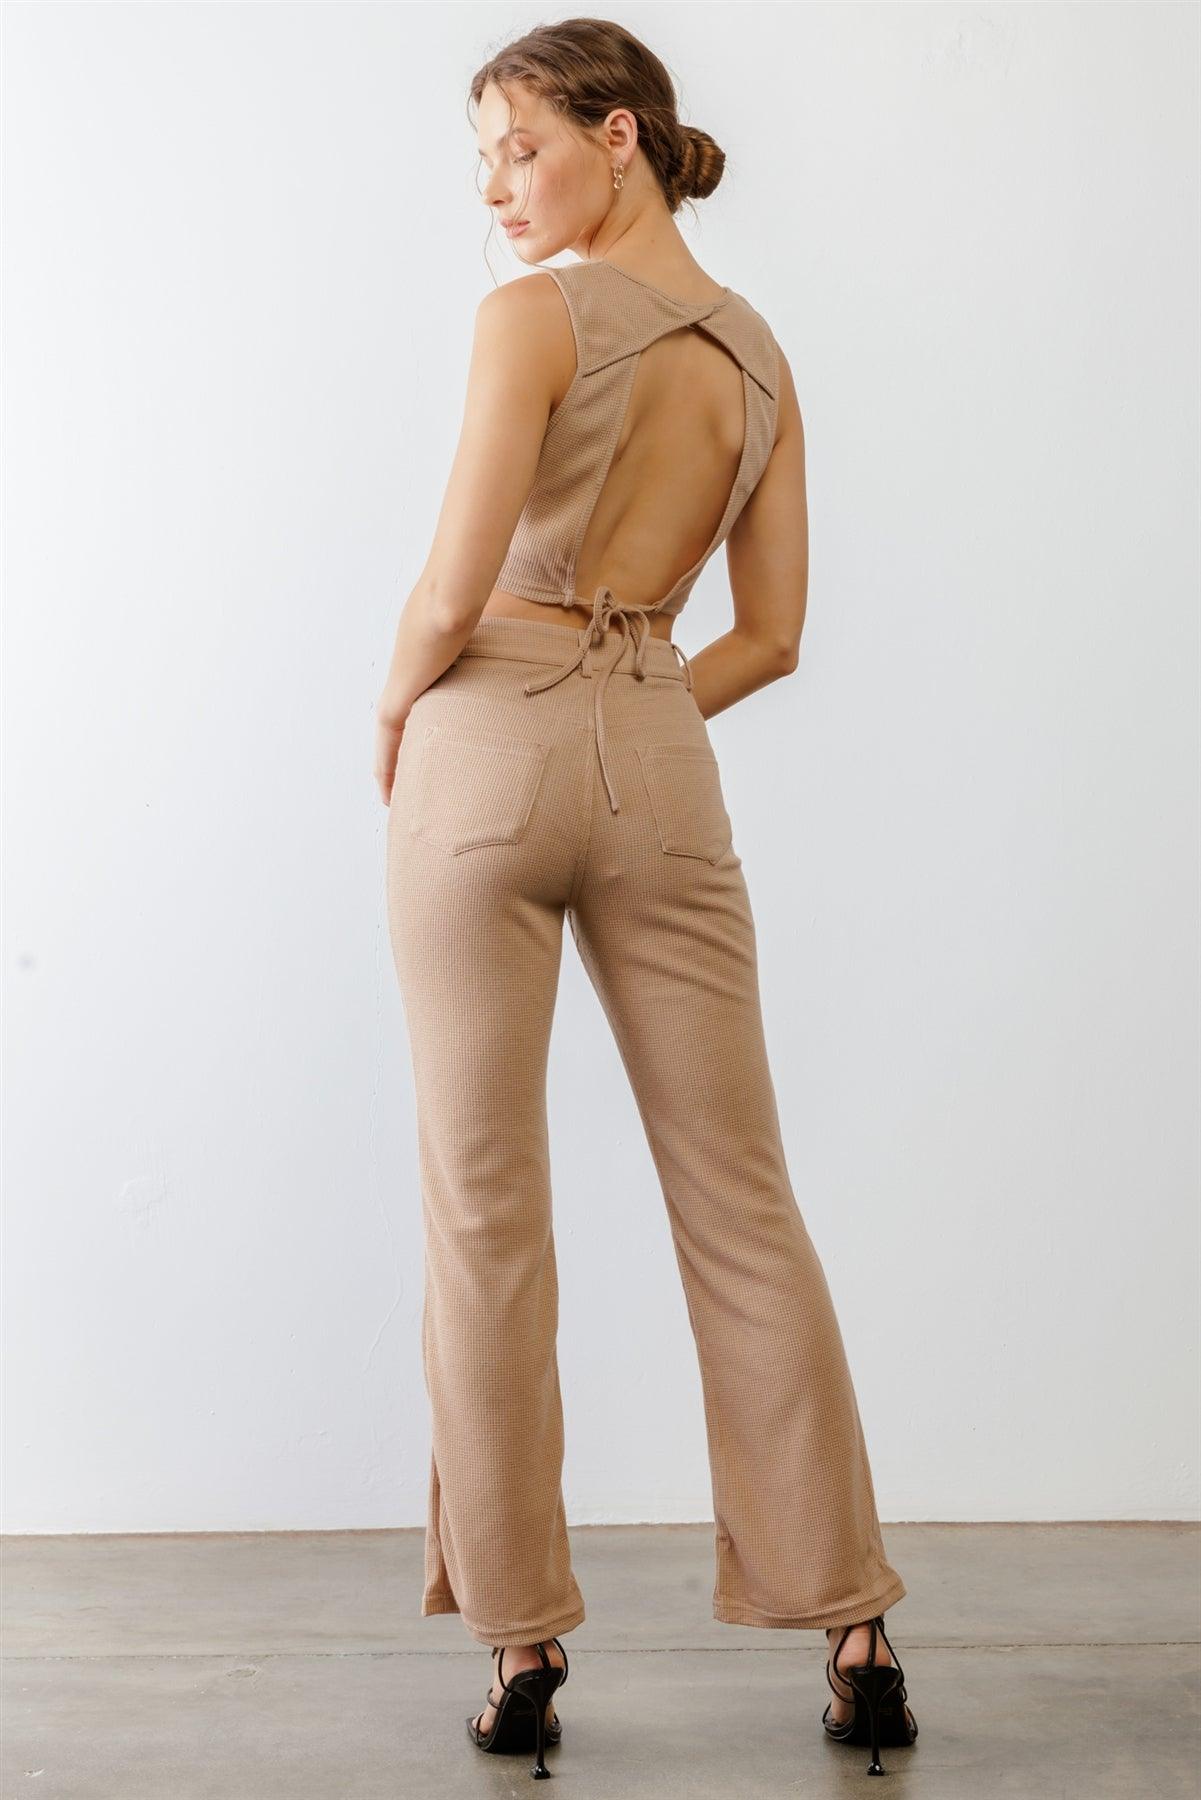 Taupe Waffle Knit Open Tie Back Crop Top & High Waist Four Pocket Pants Set /3-2-1